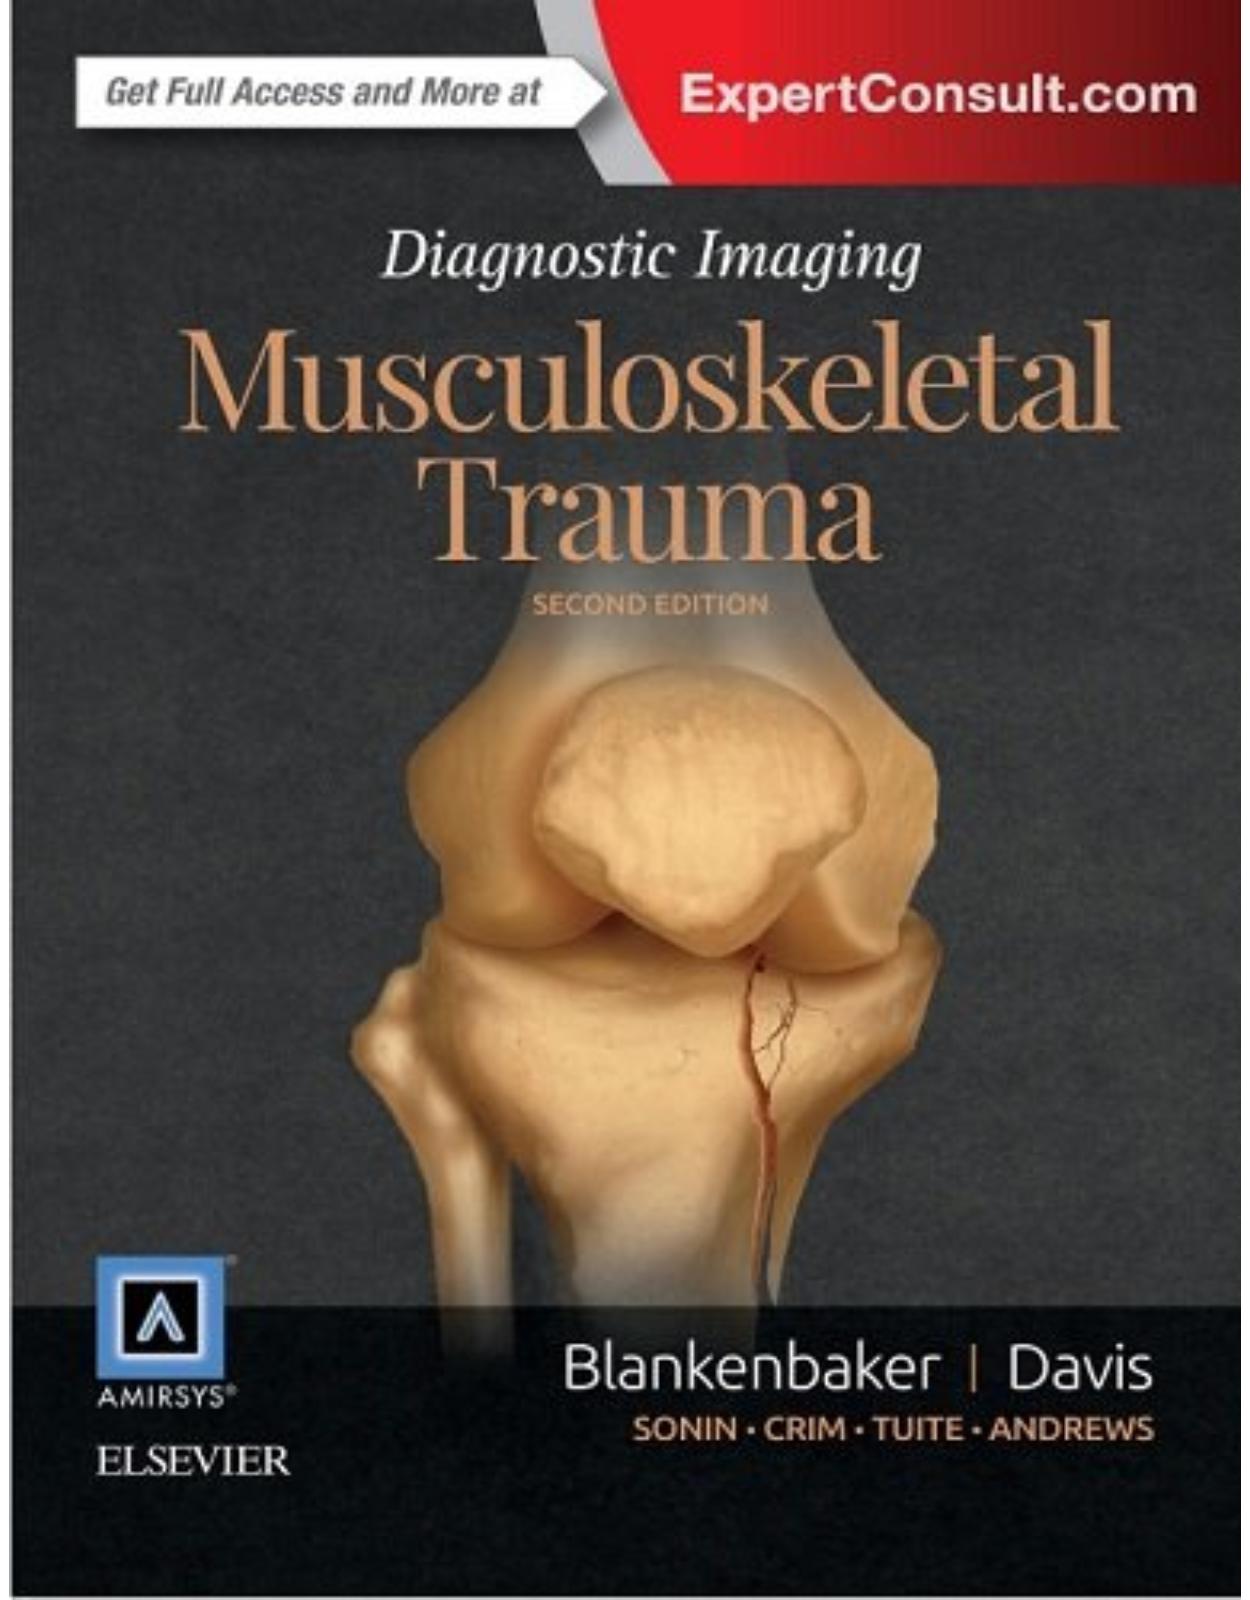 Diagnostic Imaging: Musculoskeletal Trauma, 2nd Edition